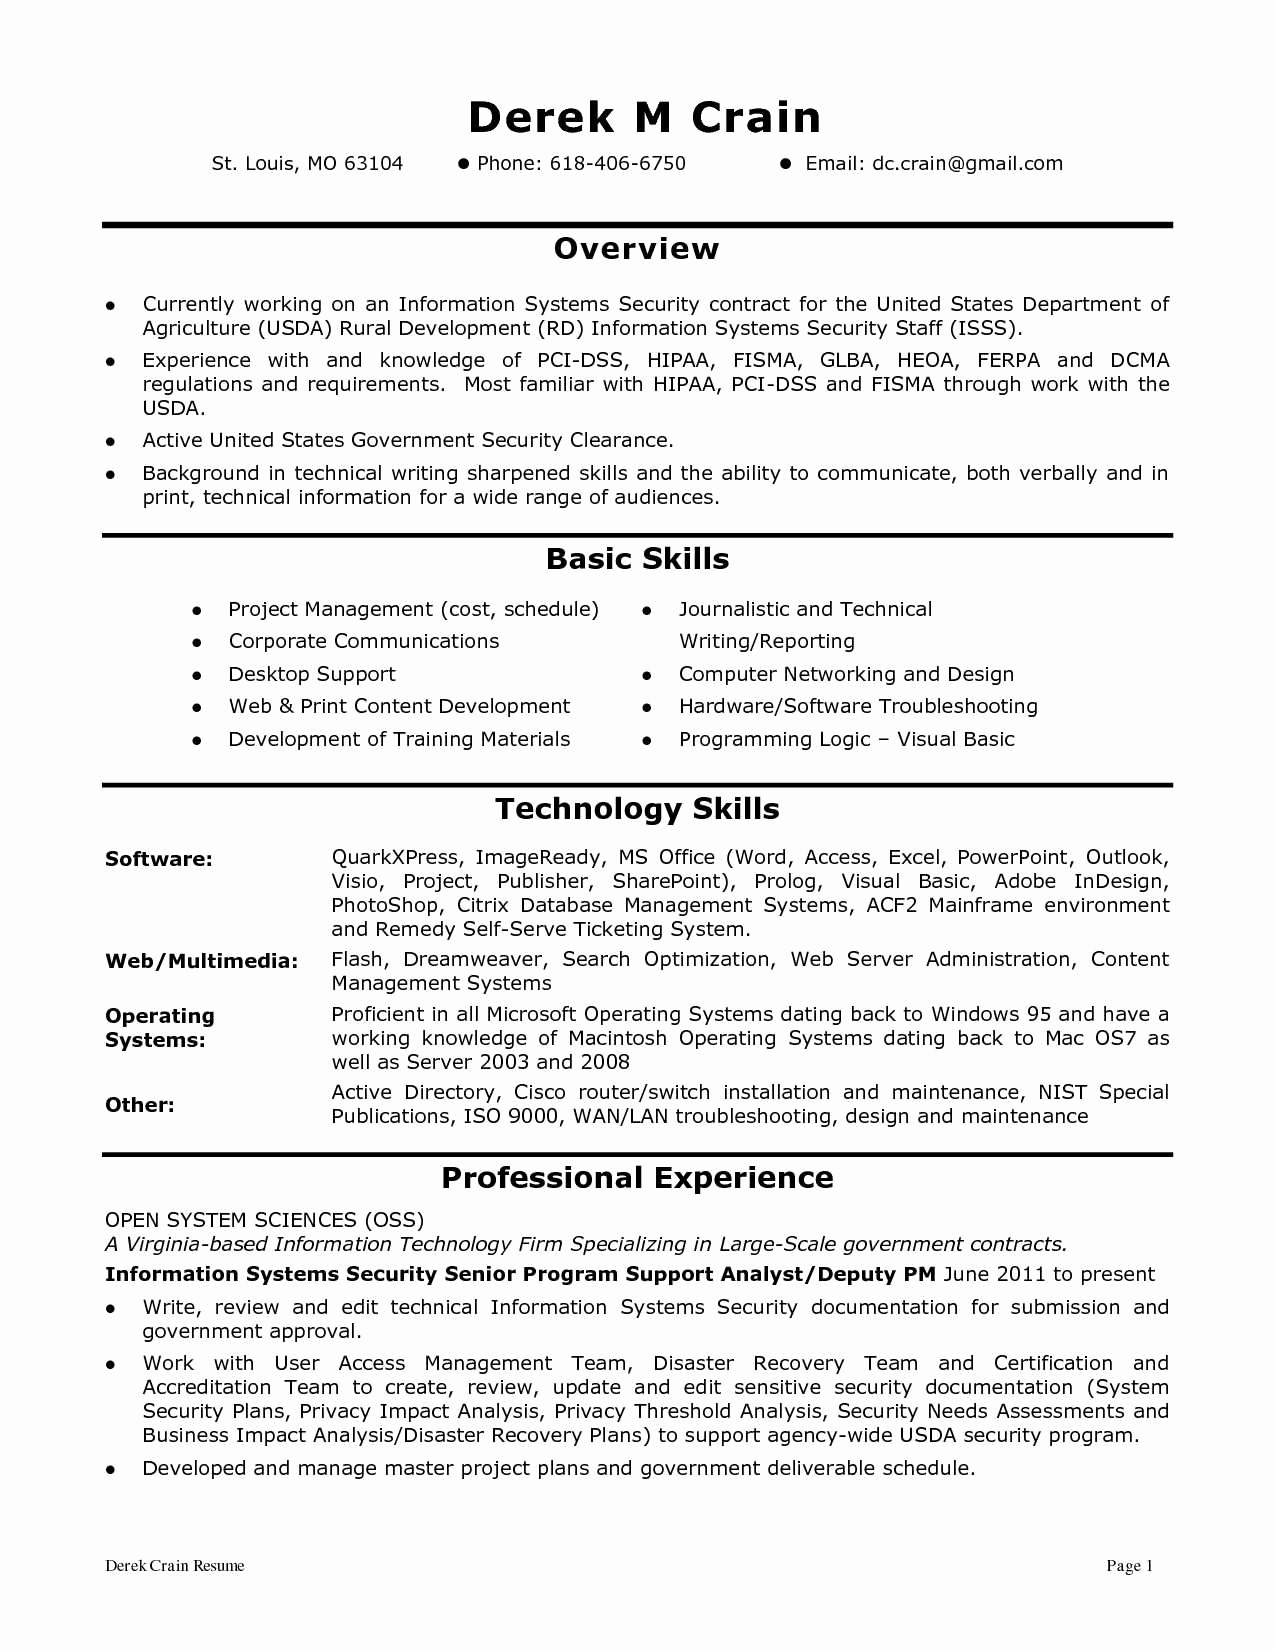 Resume Cover Letter Entry Level Awesome 50 Regular Entry Level Cyber Security Resume Ge A